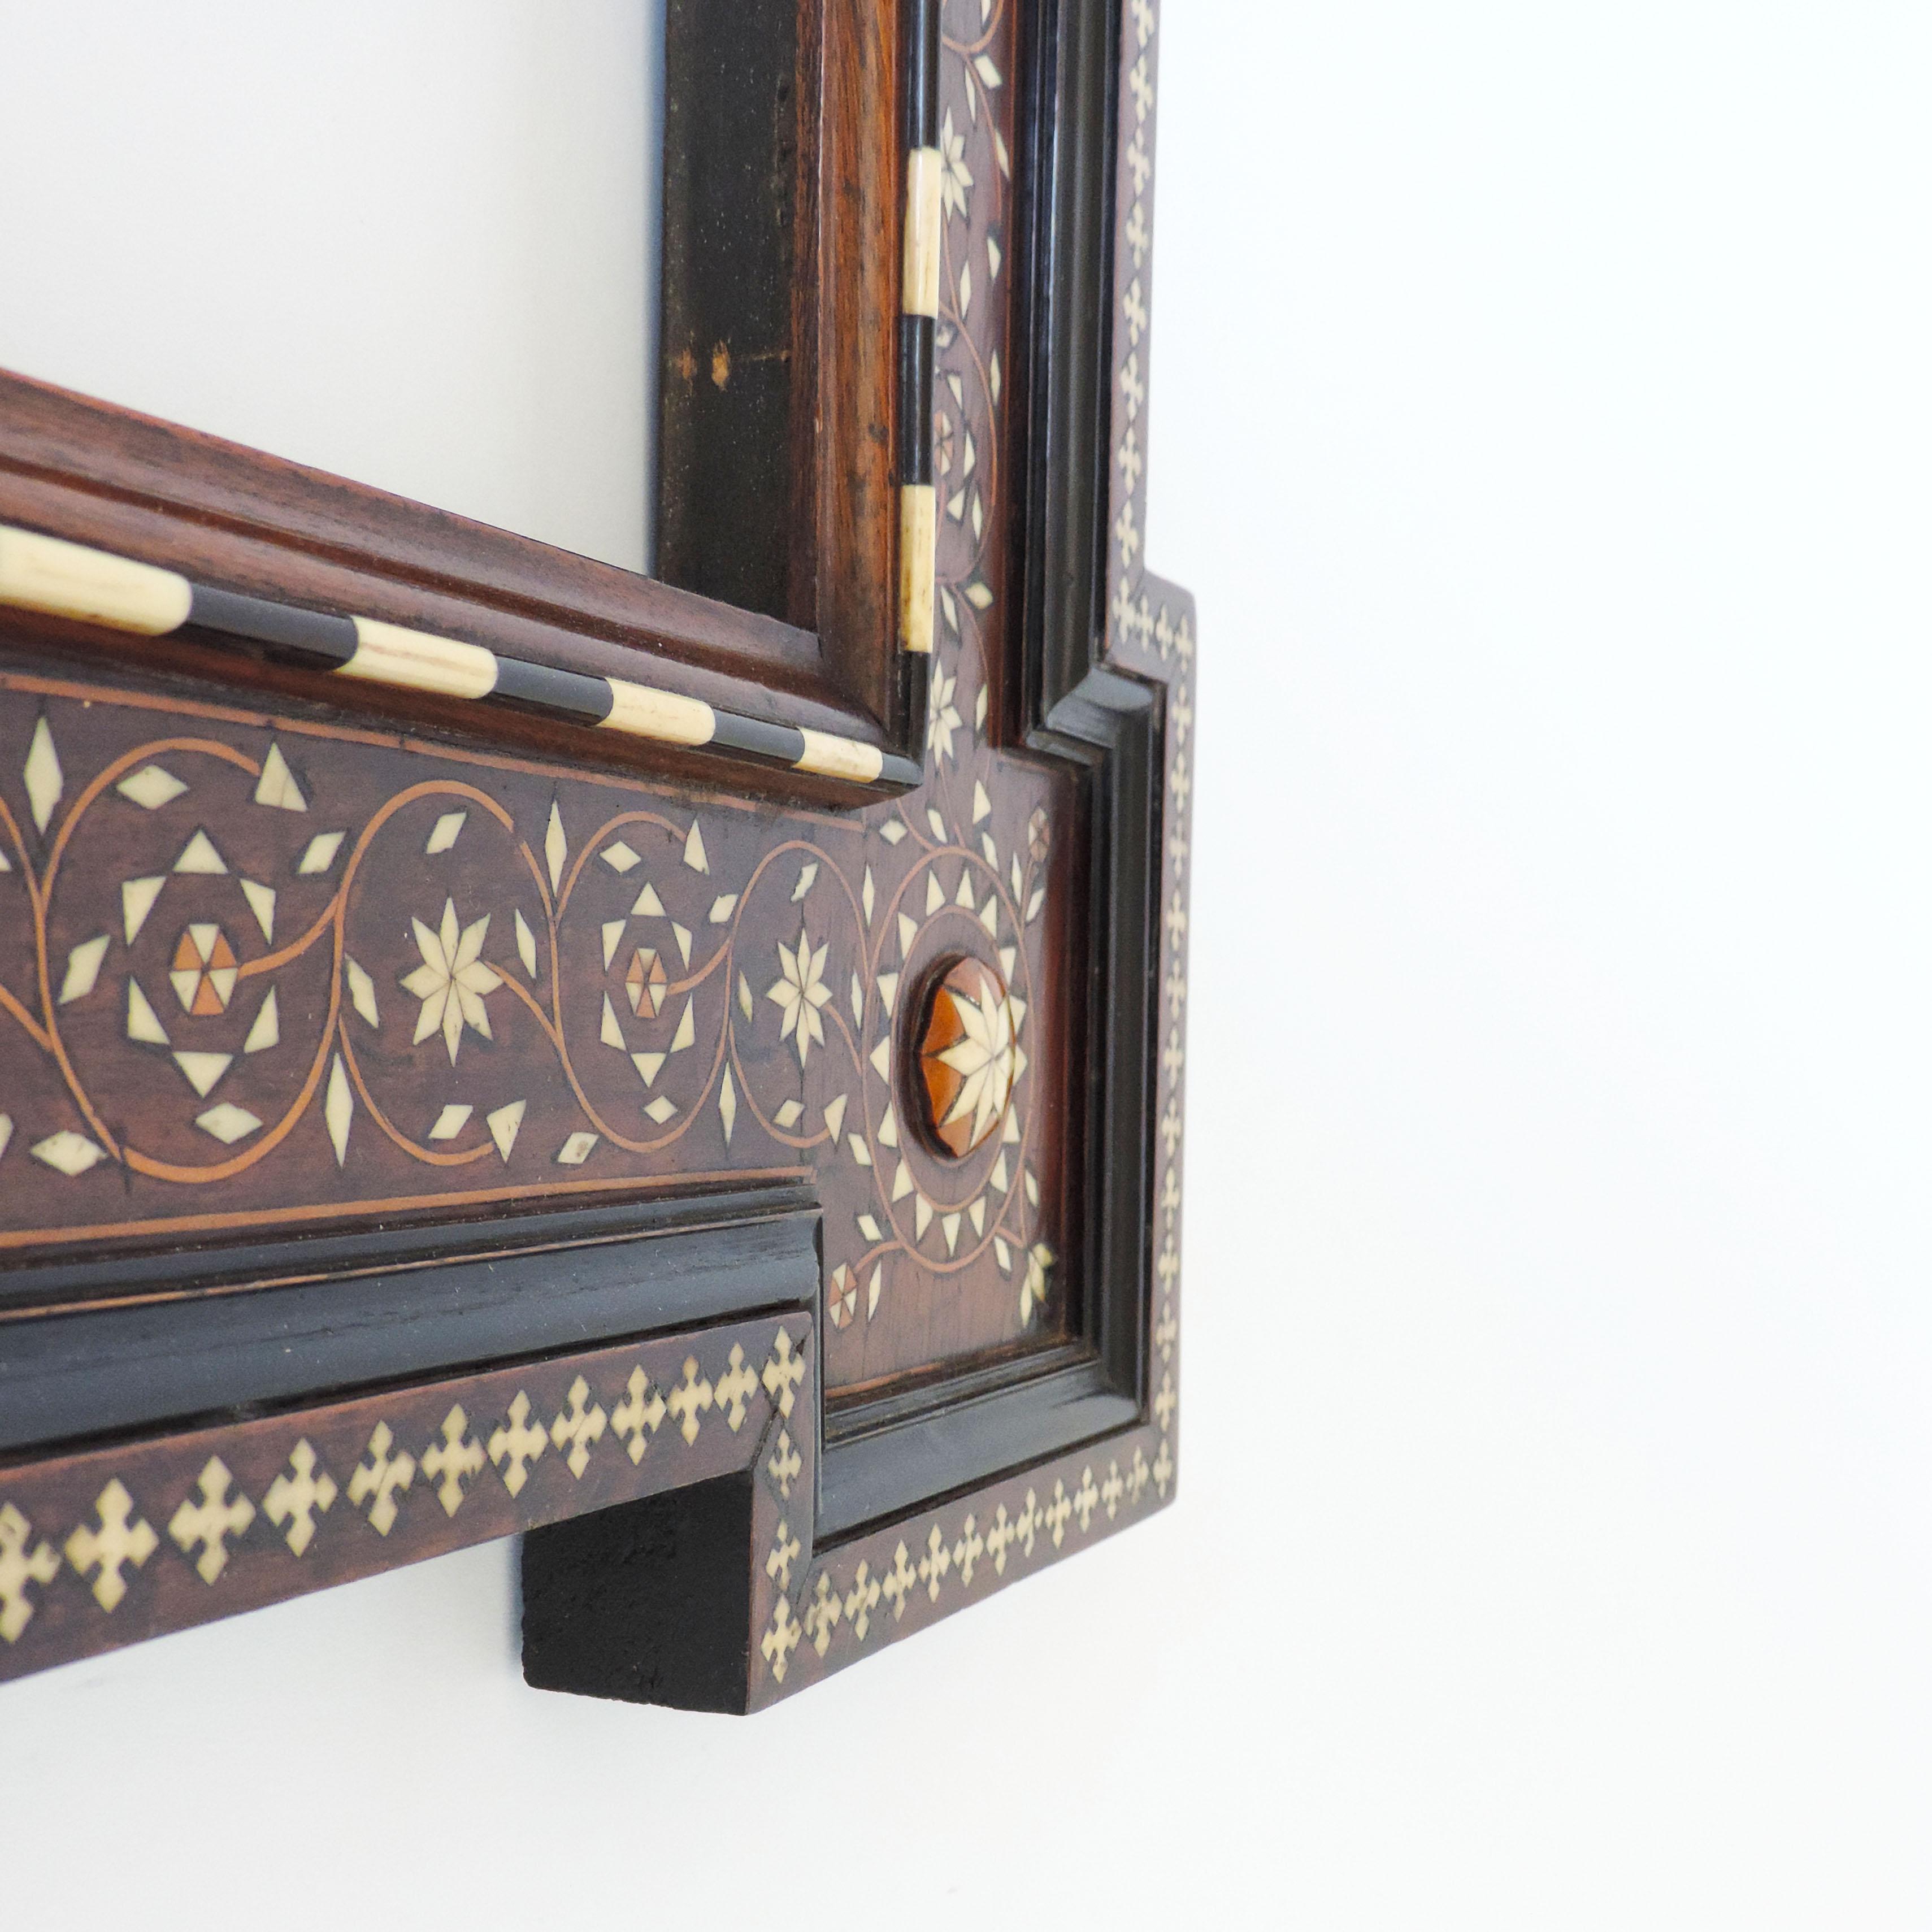 A beautiful Italian Moorish bone inlay frame with saint (Inscribed Roma) for a painting or a mirror.
Very much in the Renzo Mongiardino Taste.
Inner frame size 64.5 x 51 cm.